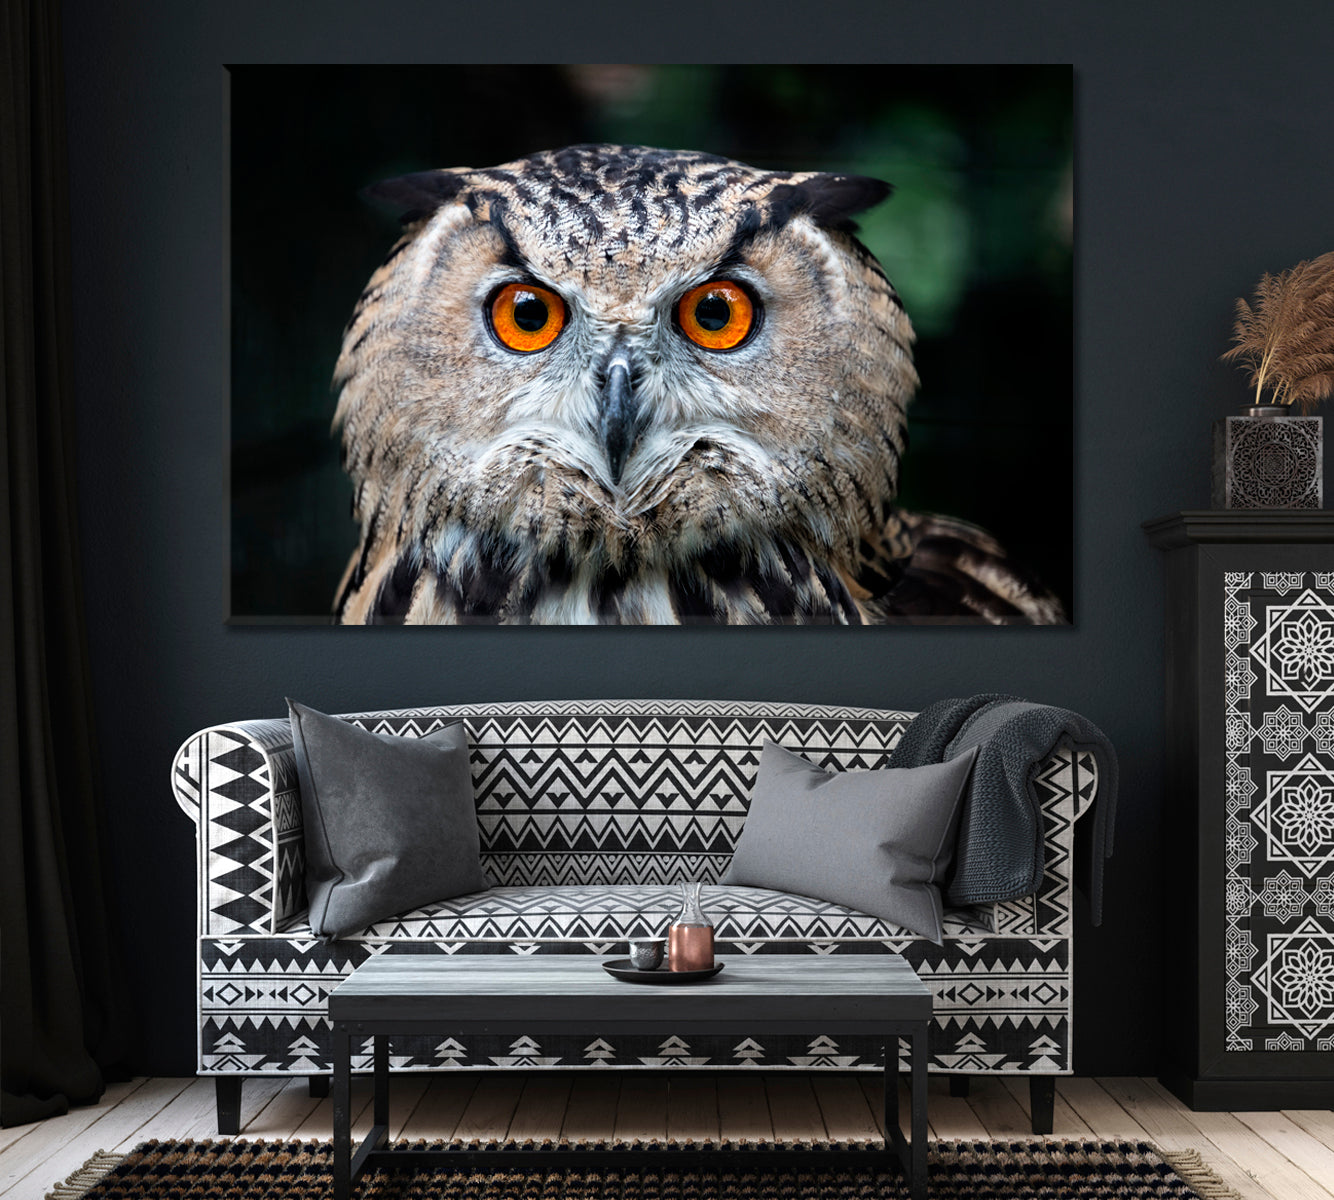 Owl with Orange Eyes Canvas Print ArtLexy 1 Panel 24"x16" inches 